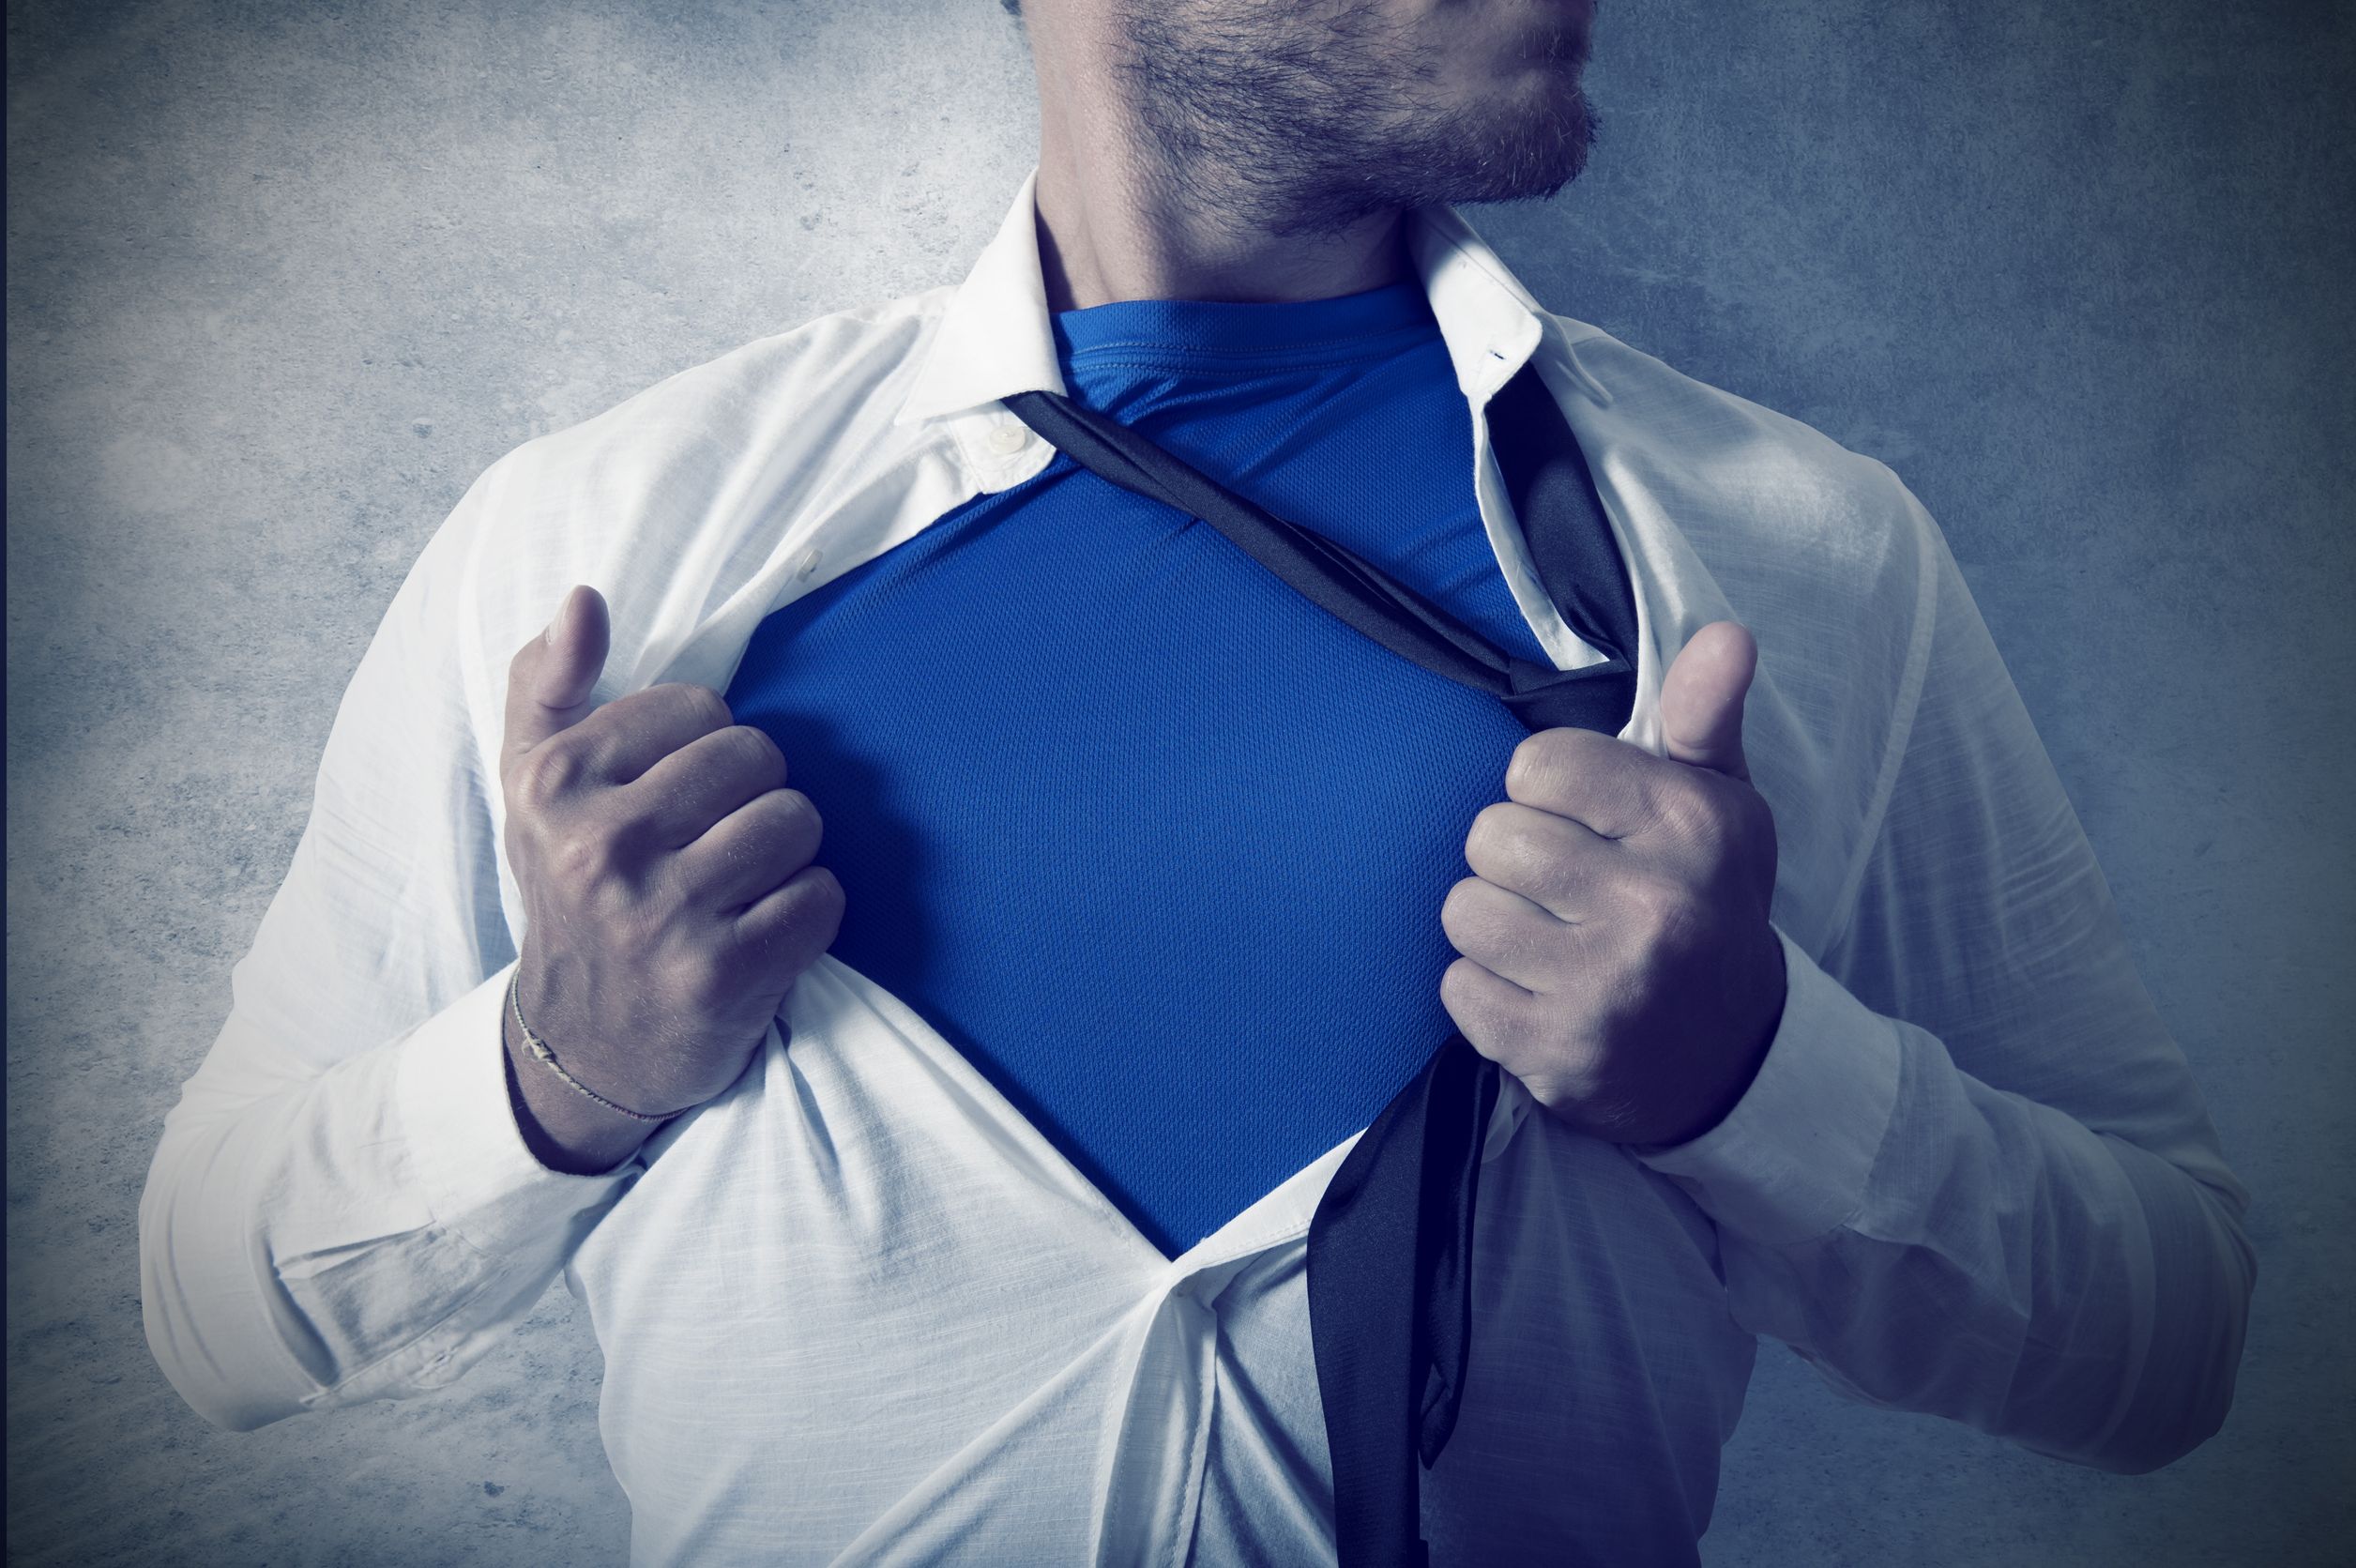 No More Supermen? Radically reinvent your approach to leadership.